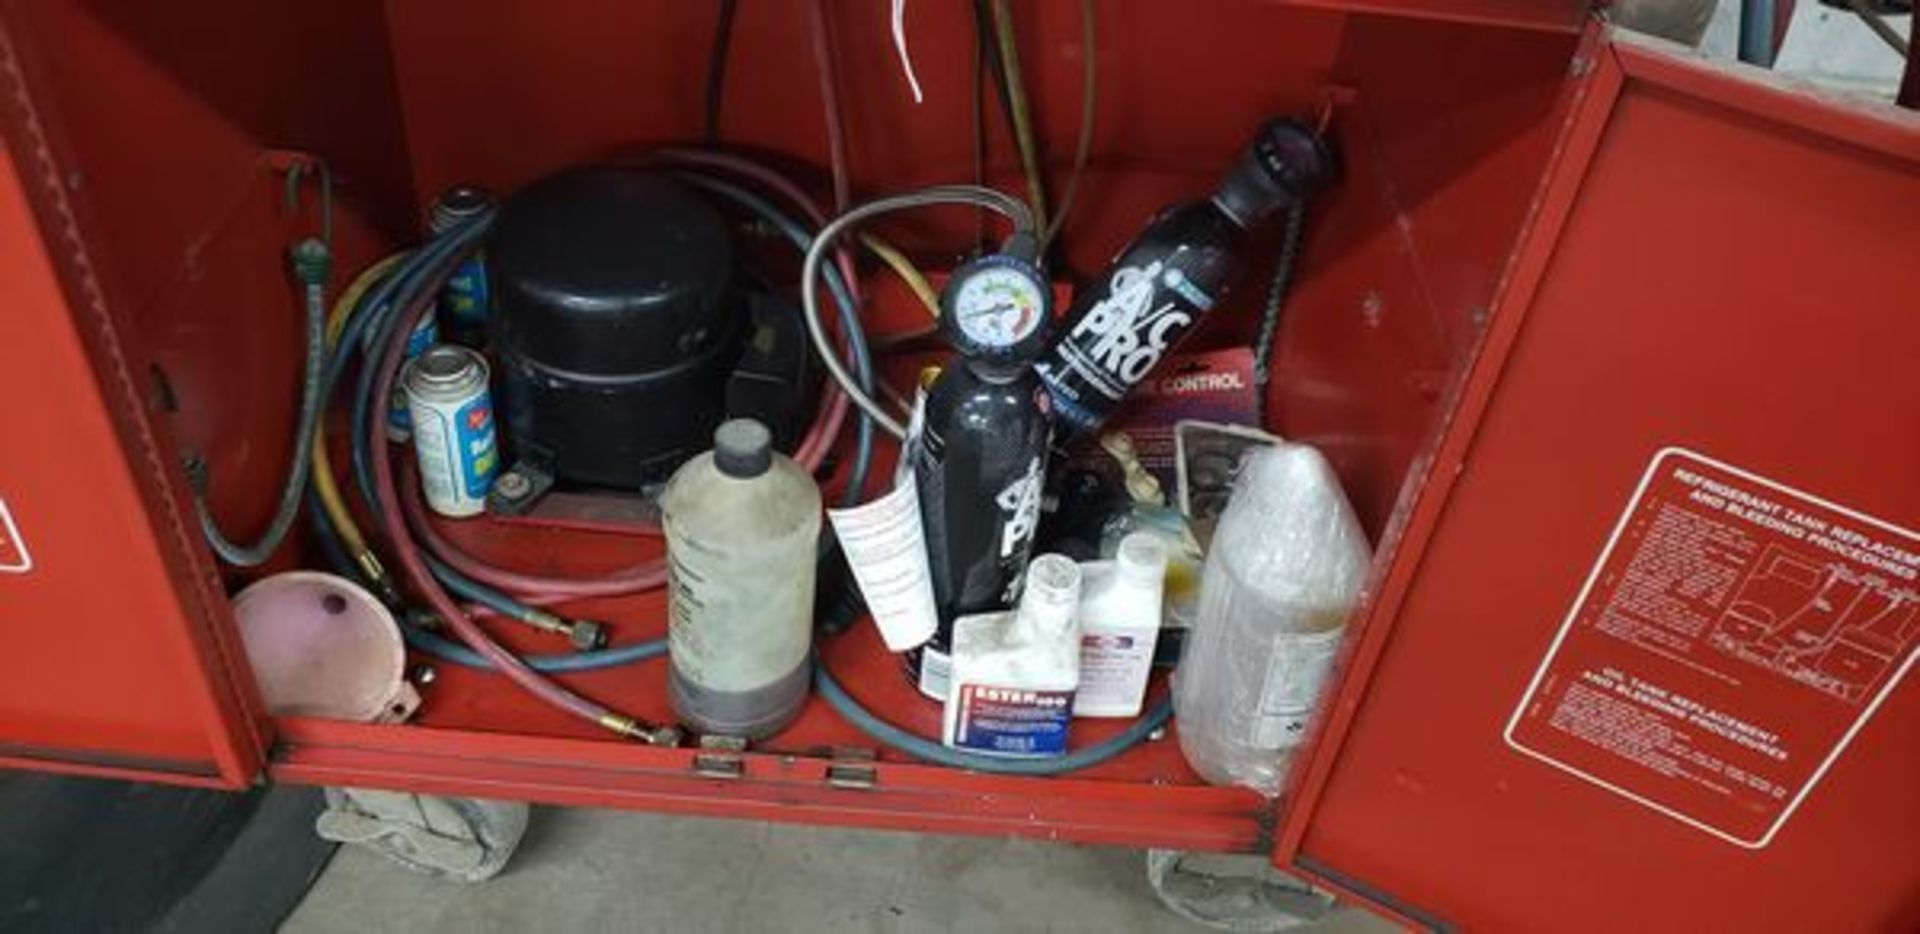 SNAP ON ACT2000 REFRIGERANT RECYCLING RECOVERY SYSTEM PLUS CONTENTS OF CABINET - Image 4 of 4